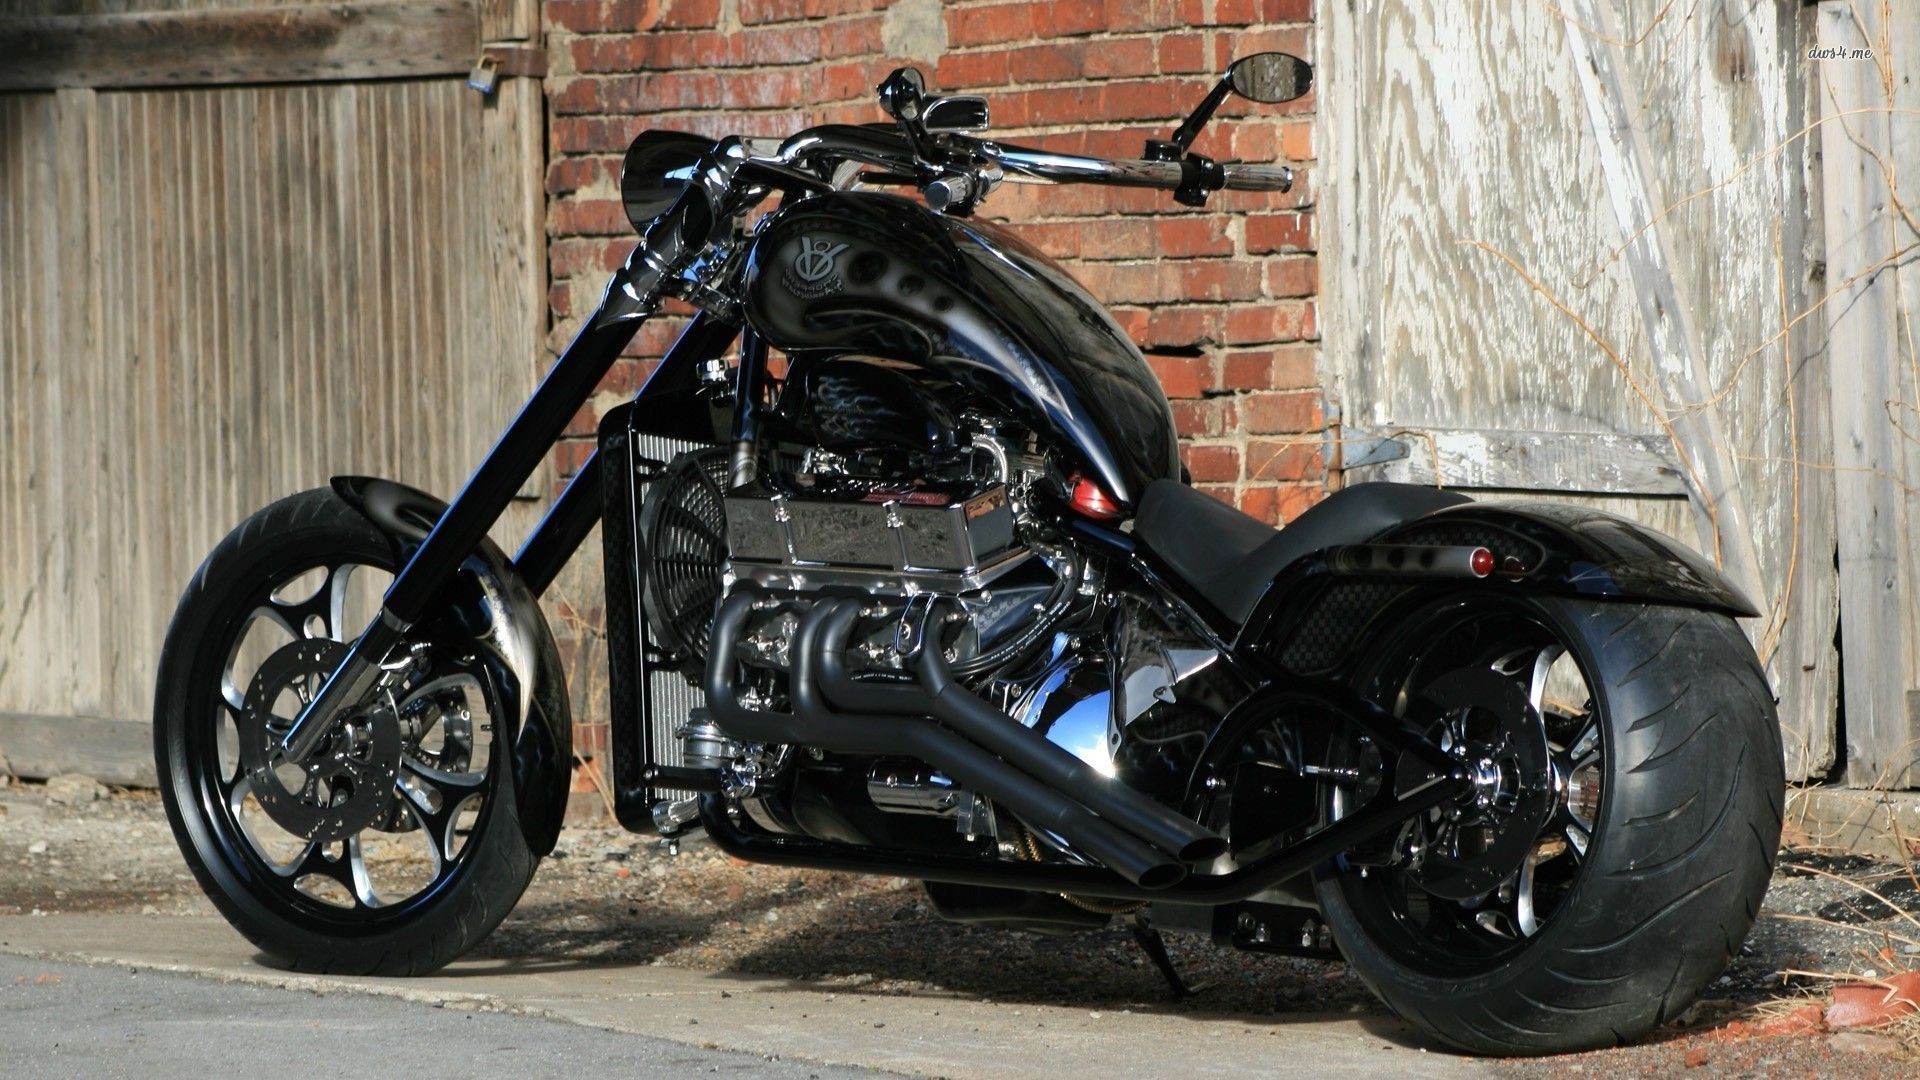 1920x1080 V8 Chopper | Motorcycles | Pinterest | Choppers, Custom motorcycles and Cars